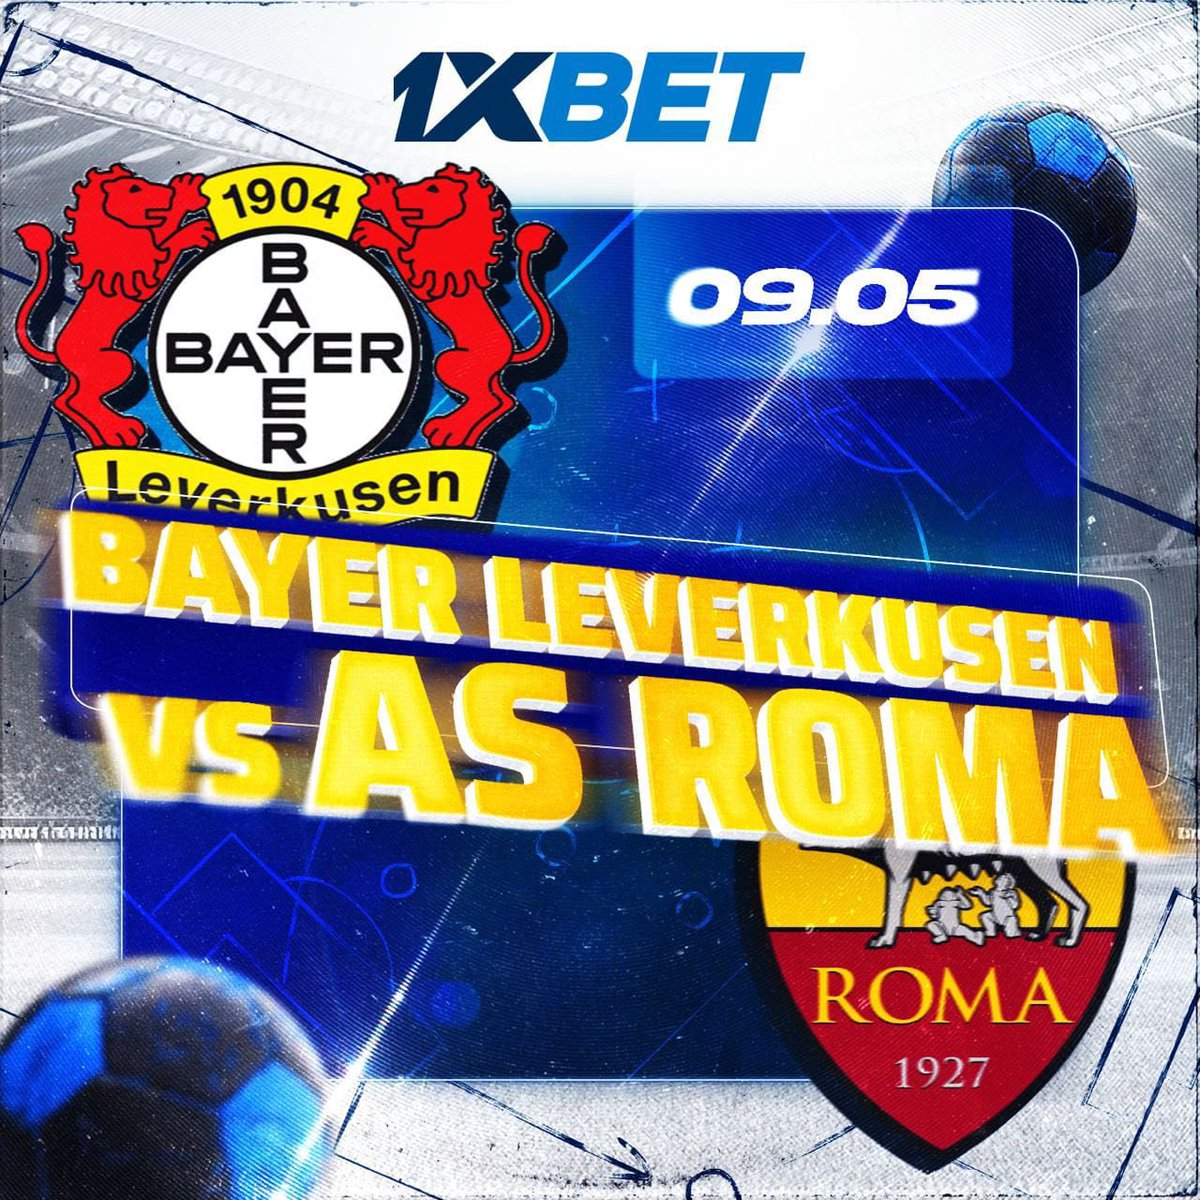 Bayer leverkusen 🆚 Roma what’s your prediction? place your bet on 1xbet 🔥 Link: bit.ly/3XyTSAY And Use my Promocode: GUCCI1x for your bonus